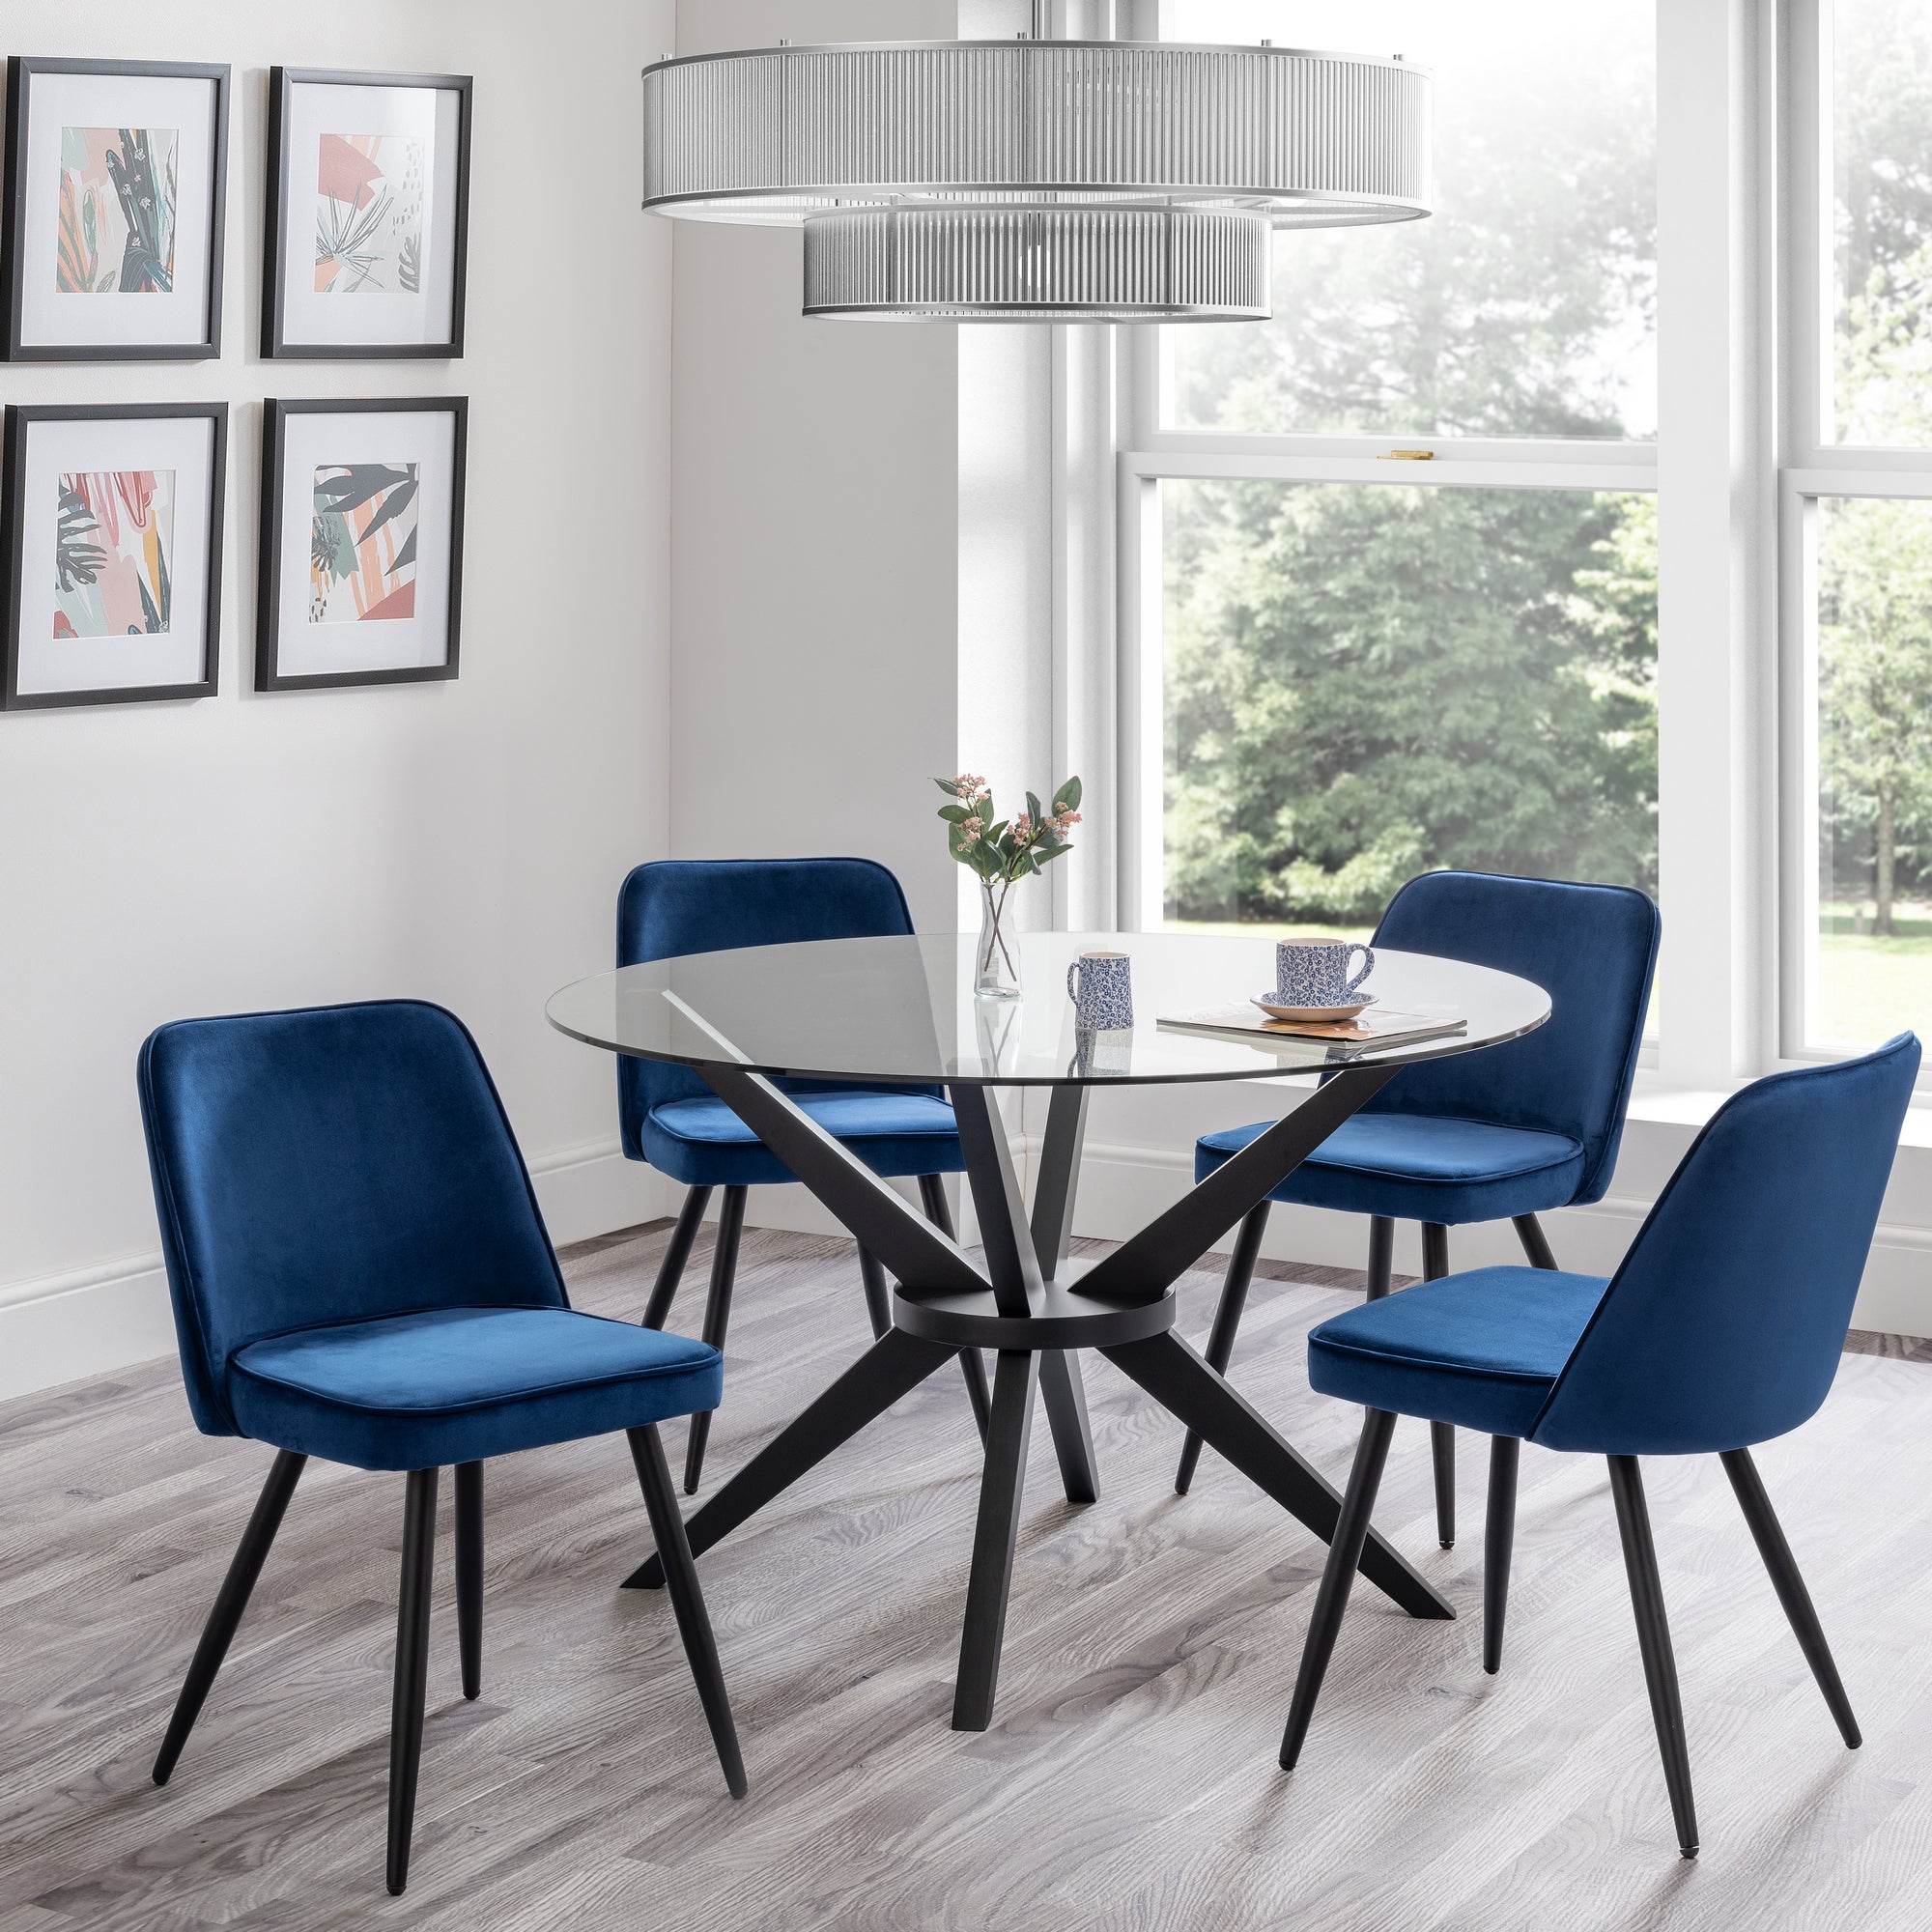 Hayden Round Glass Top Dining Table With 4 Burgess Chairs Blue